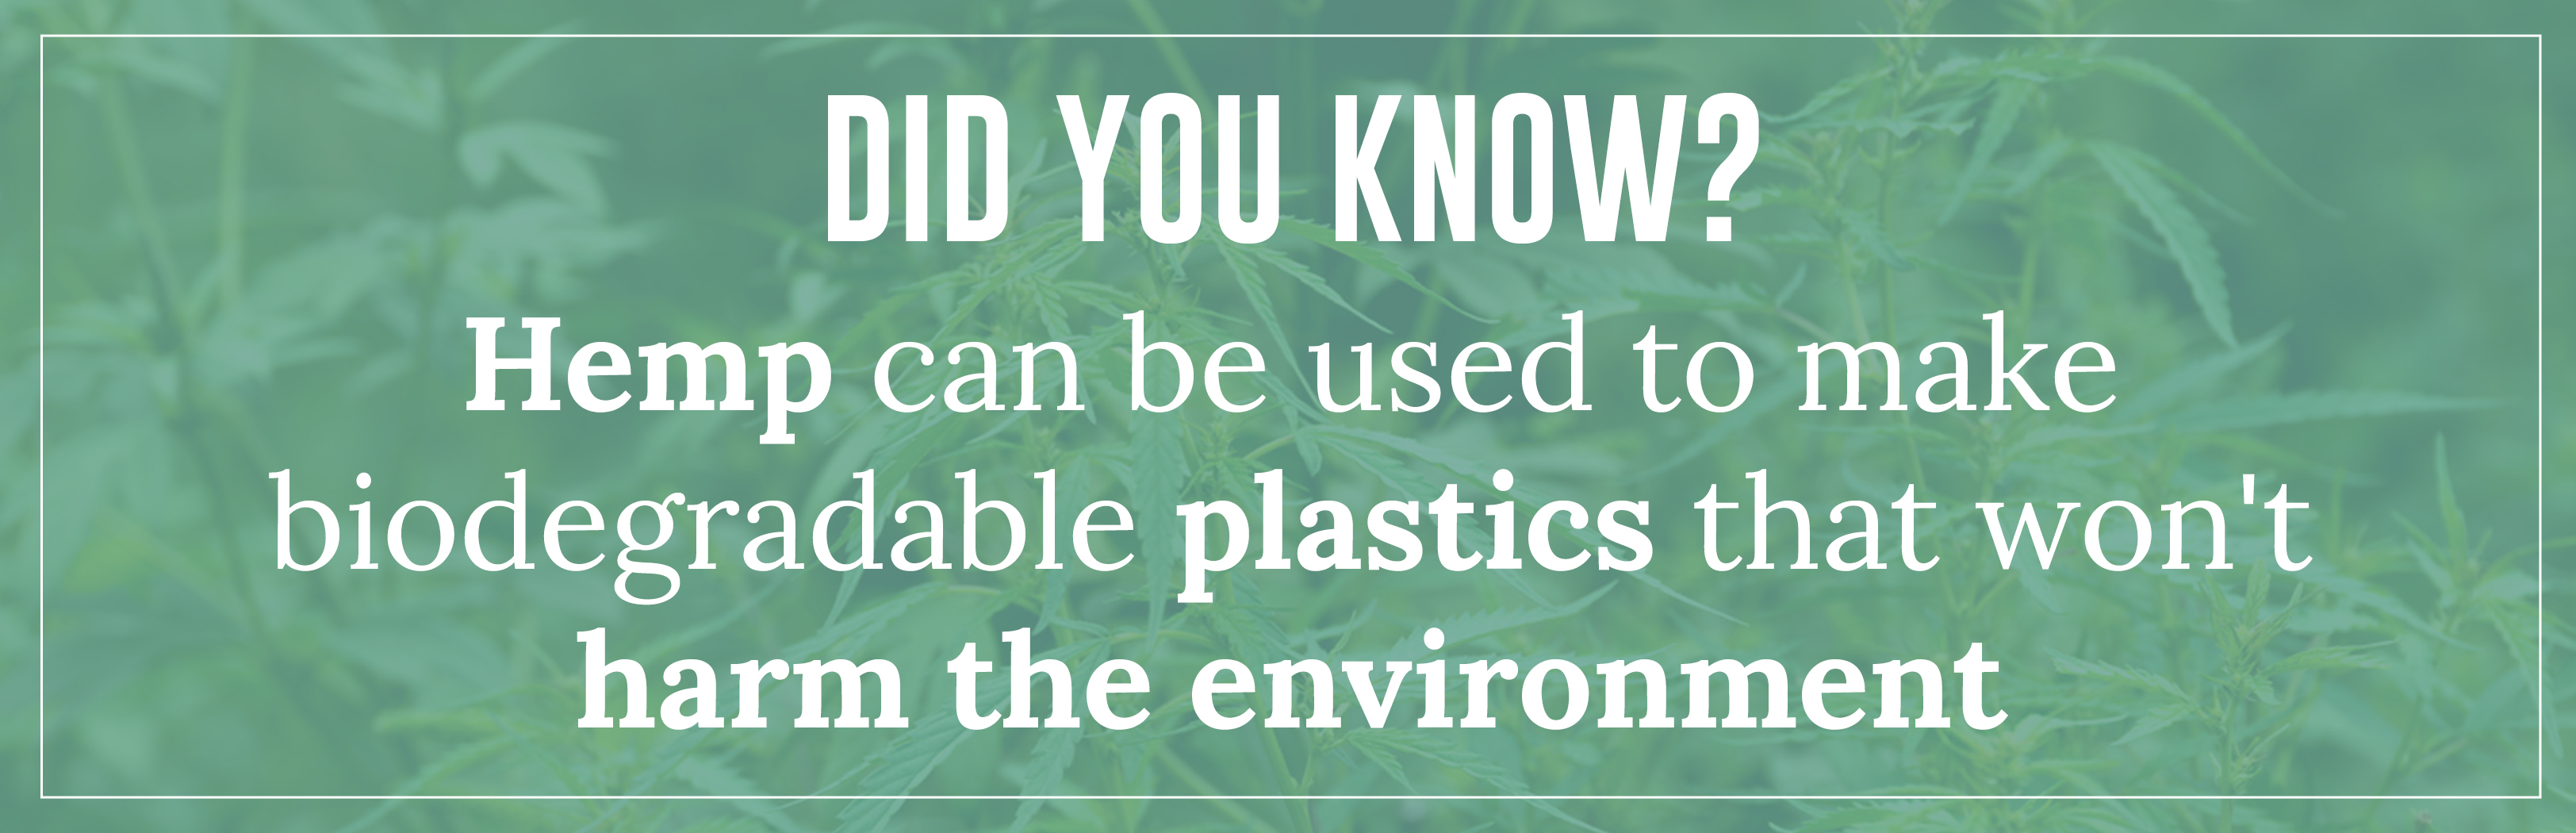 Hemp can be used to make biodegradable plastics that won't harm the environment